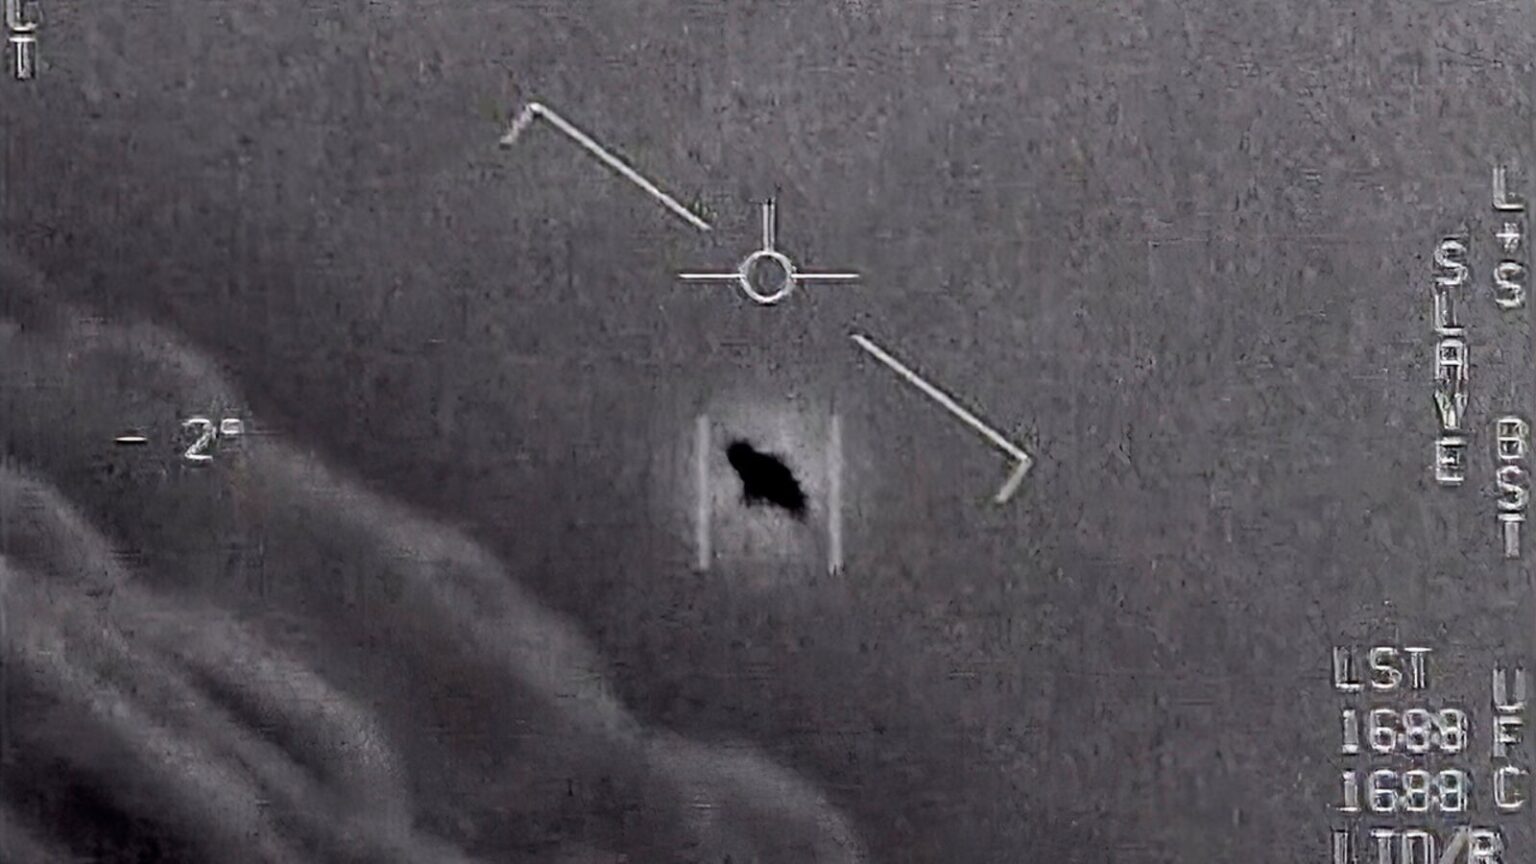 Just why is 2023 becoming the year of UFO sightings? Dive inside the newest pics and see what just might the evidence we need!